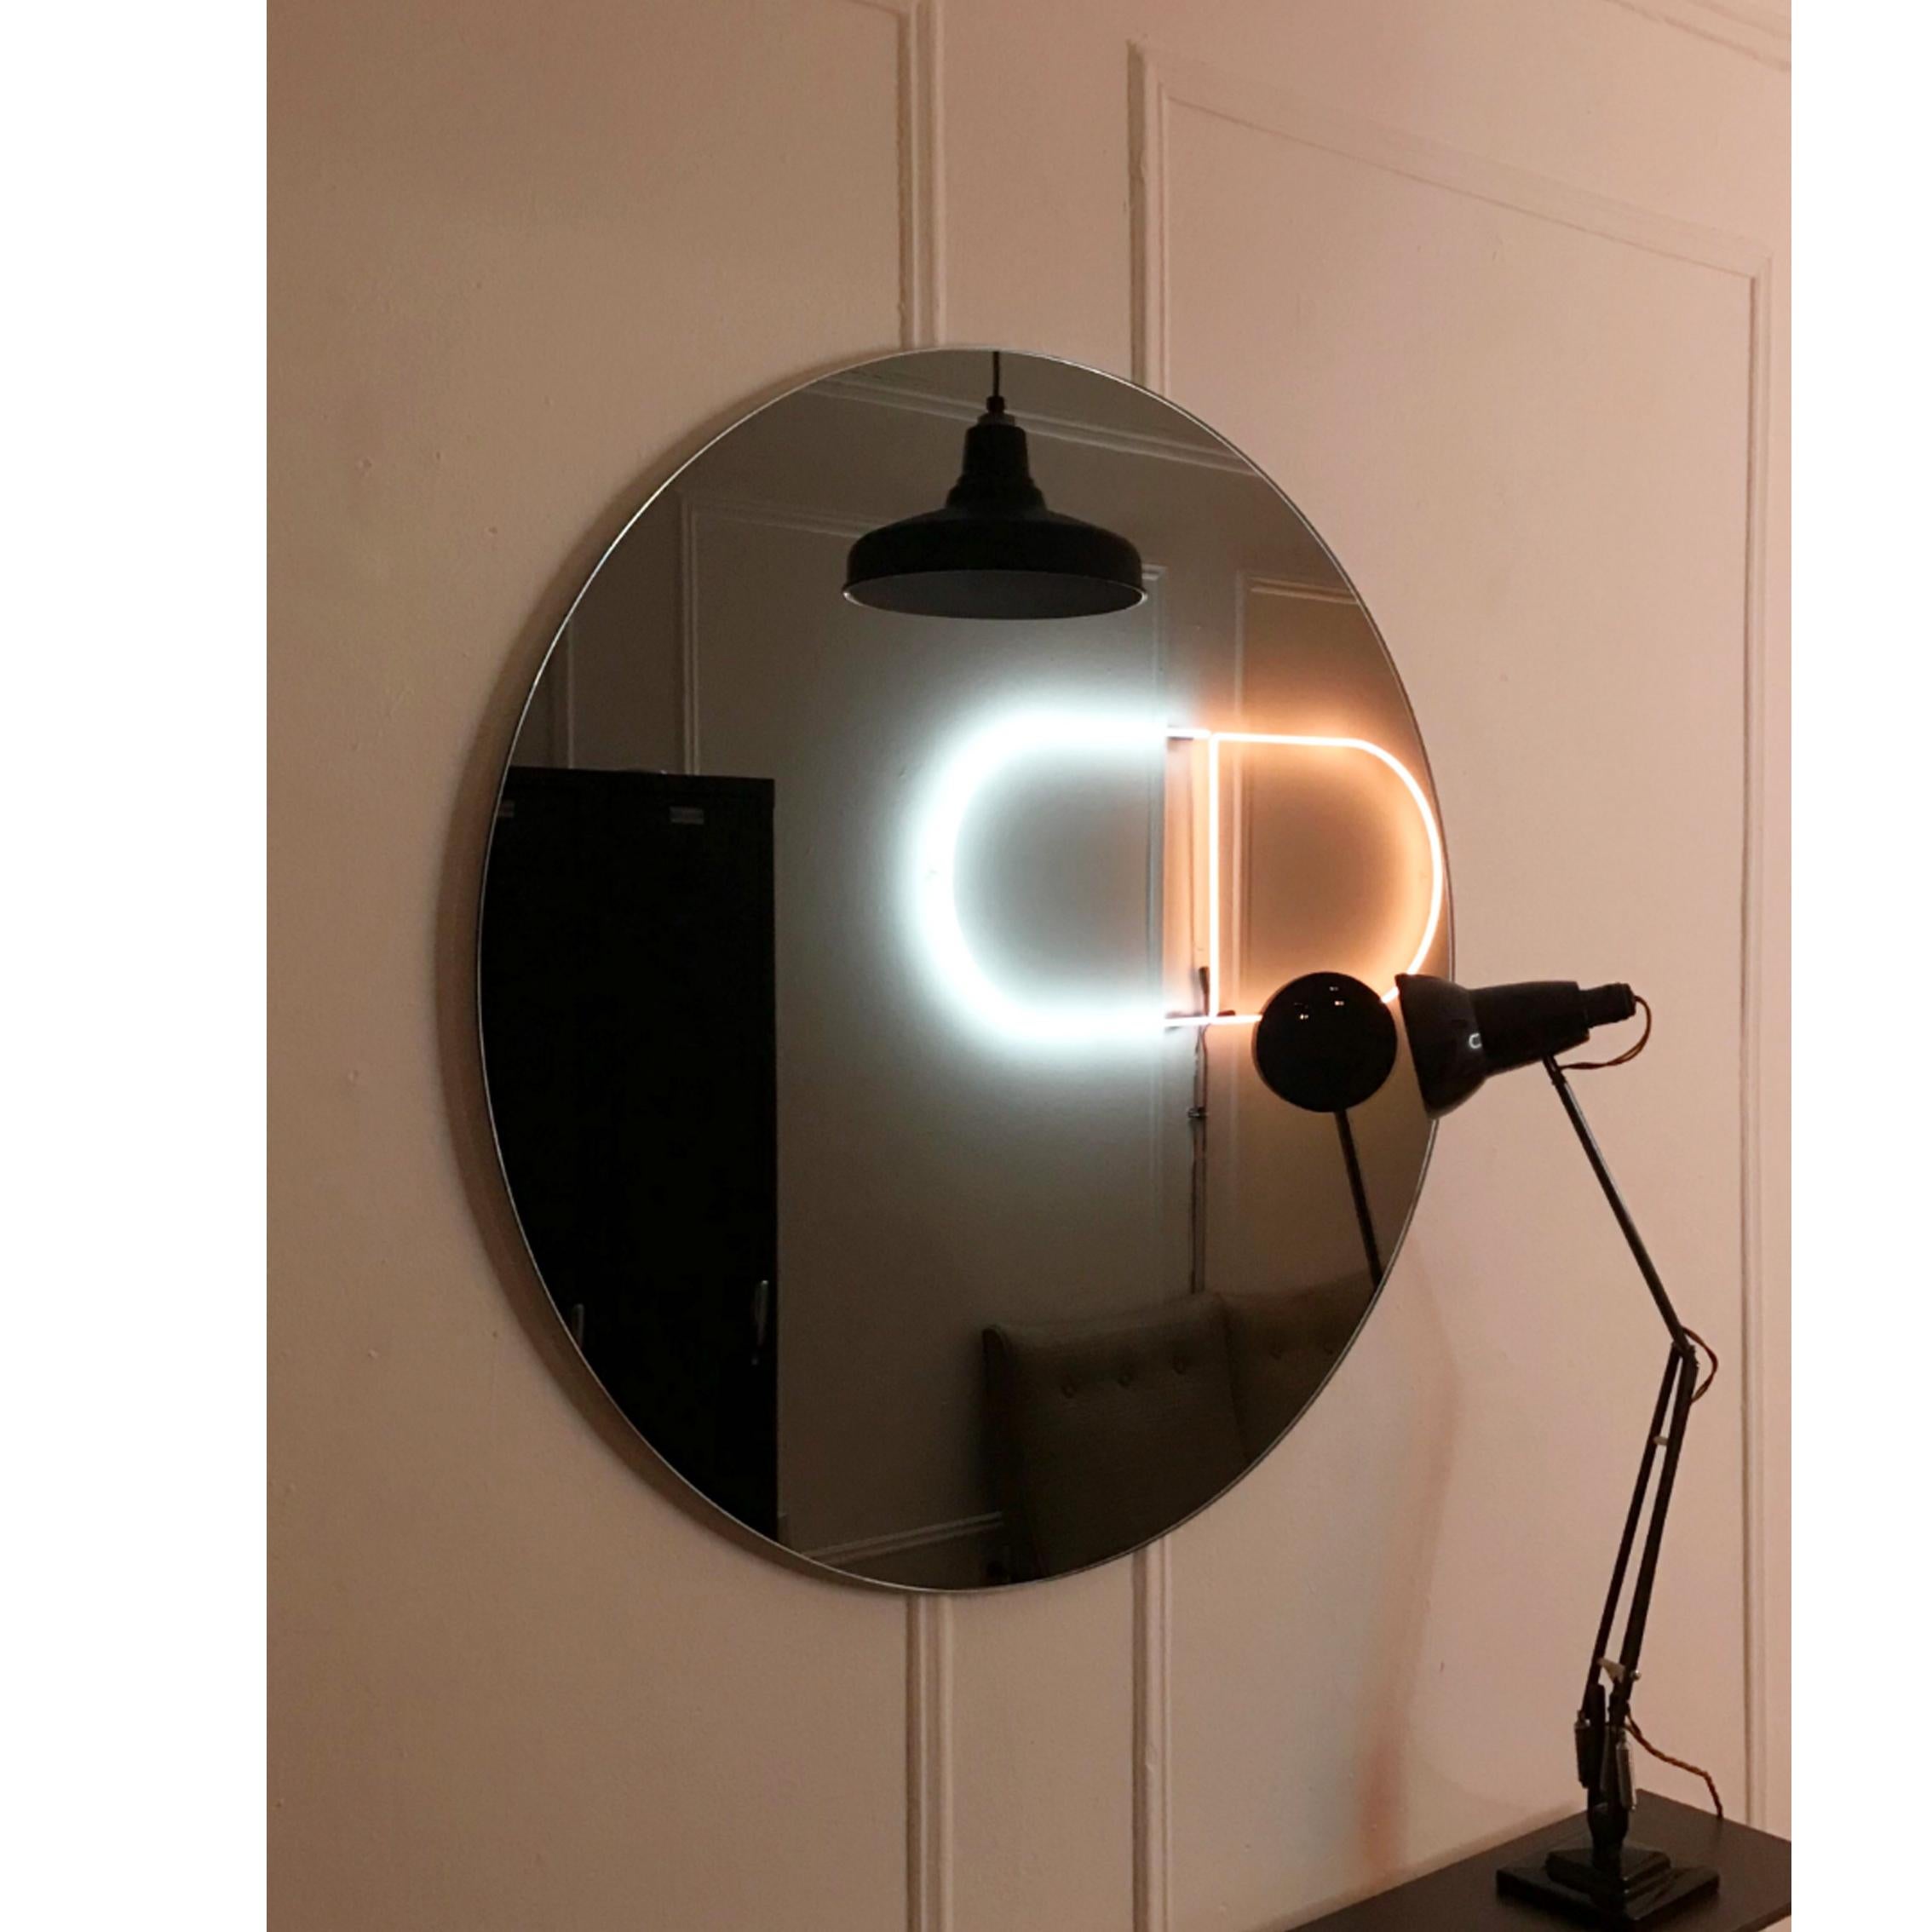 Orbis Black Tinted Round Frameless Contemporary Mirror, Floating Effect, Regular In New Condition For Sale In London, GB